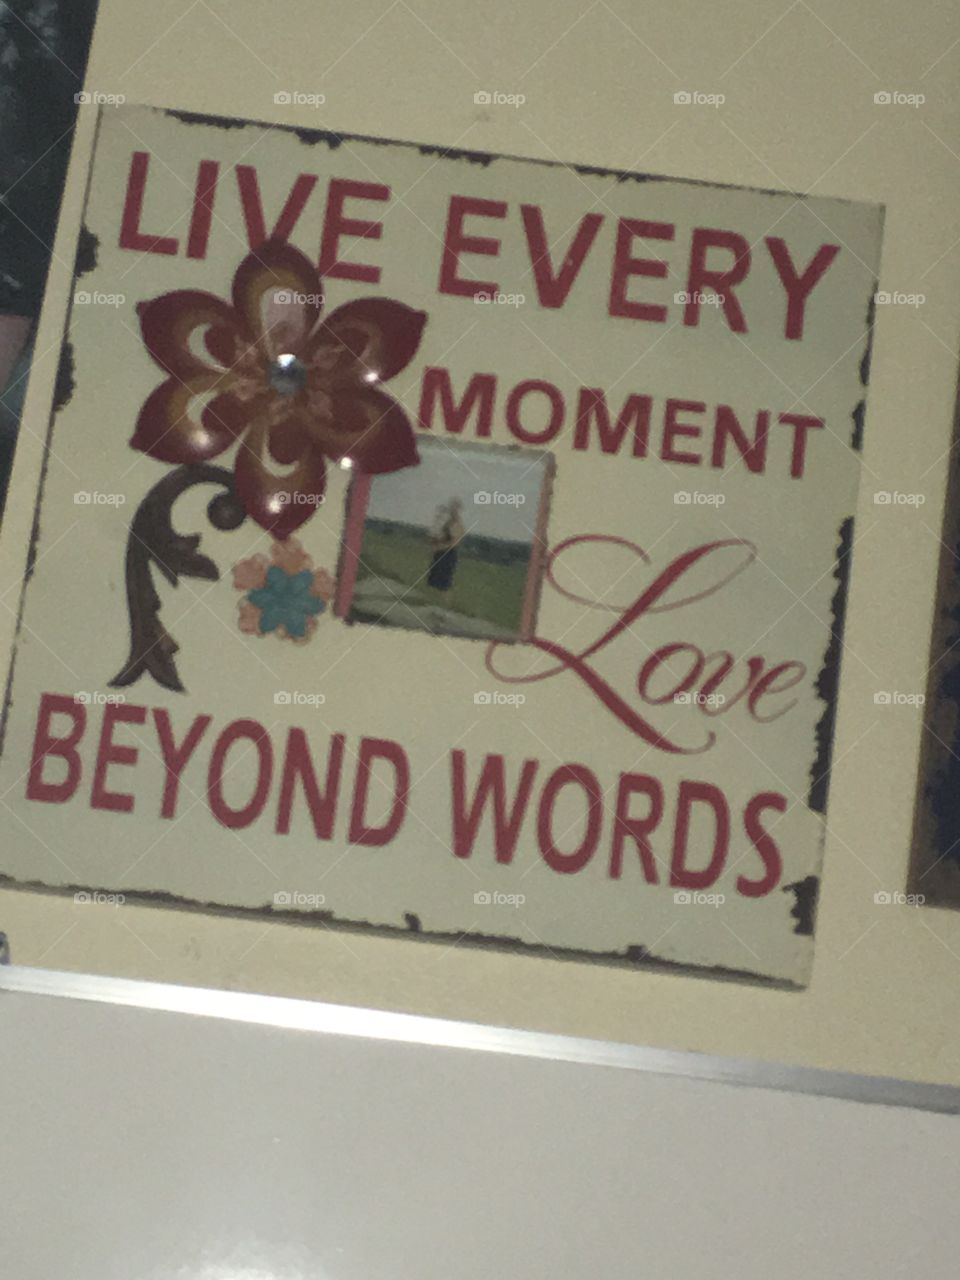 Live every moment, love beyond words.